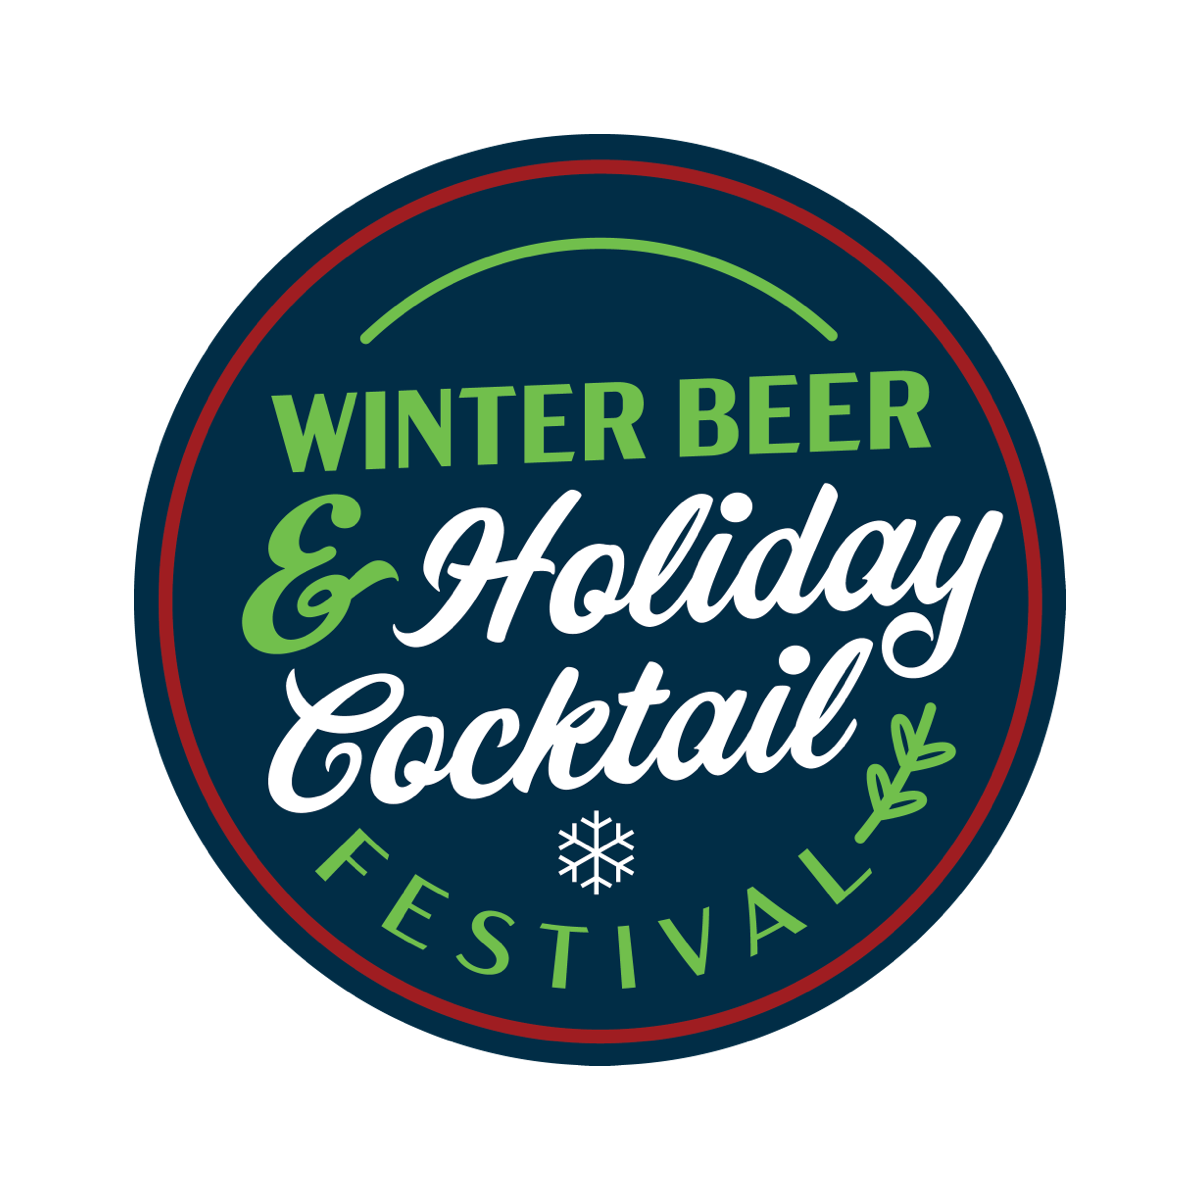 Winter Beer & Holiday Cocktail Festival logo